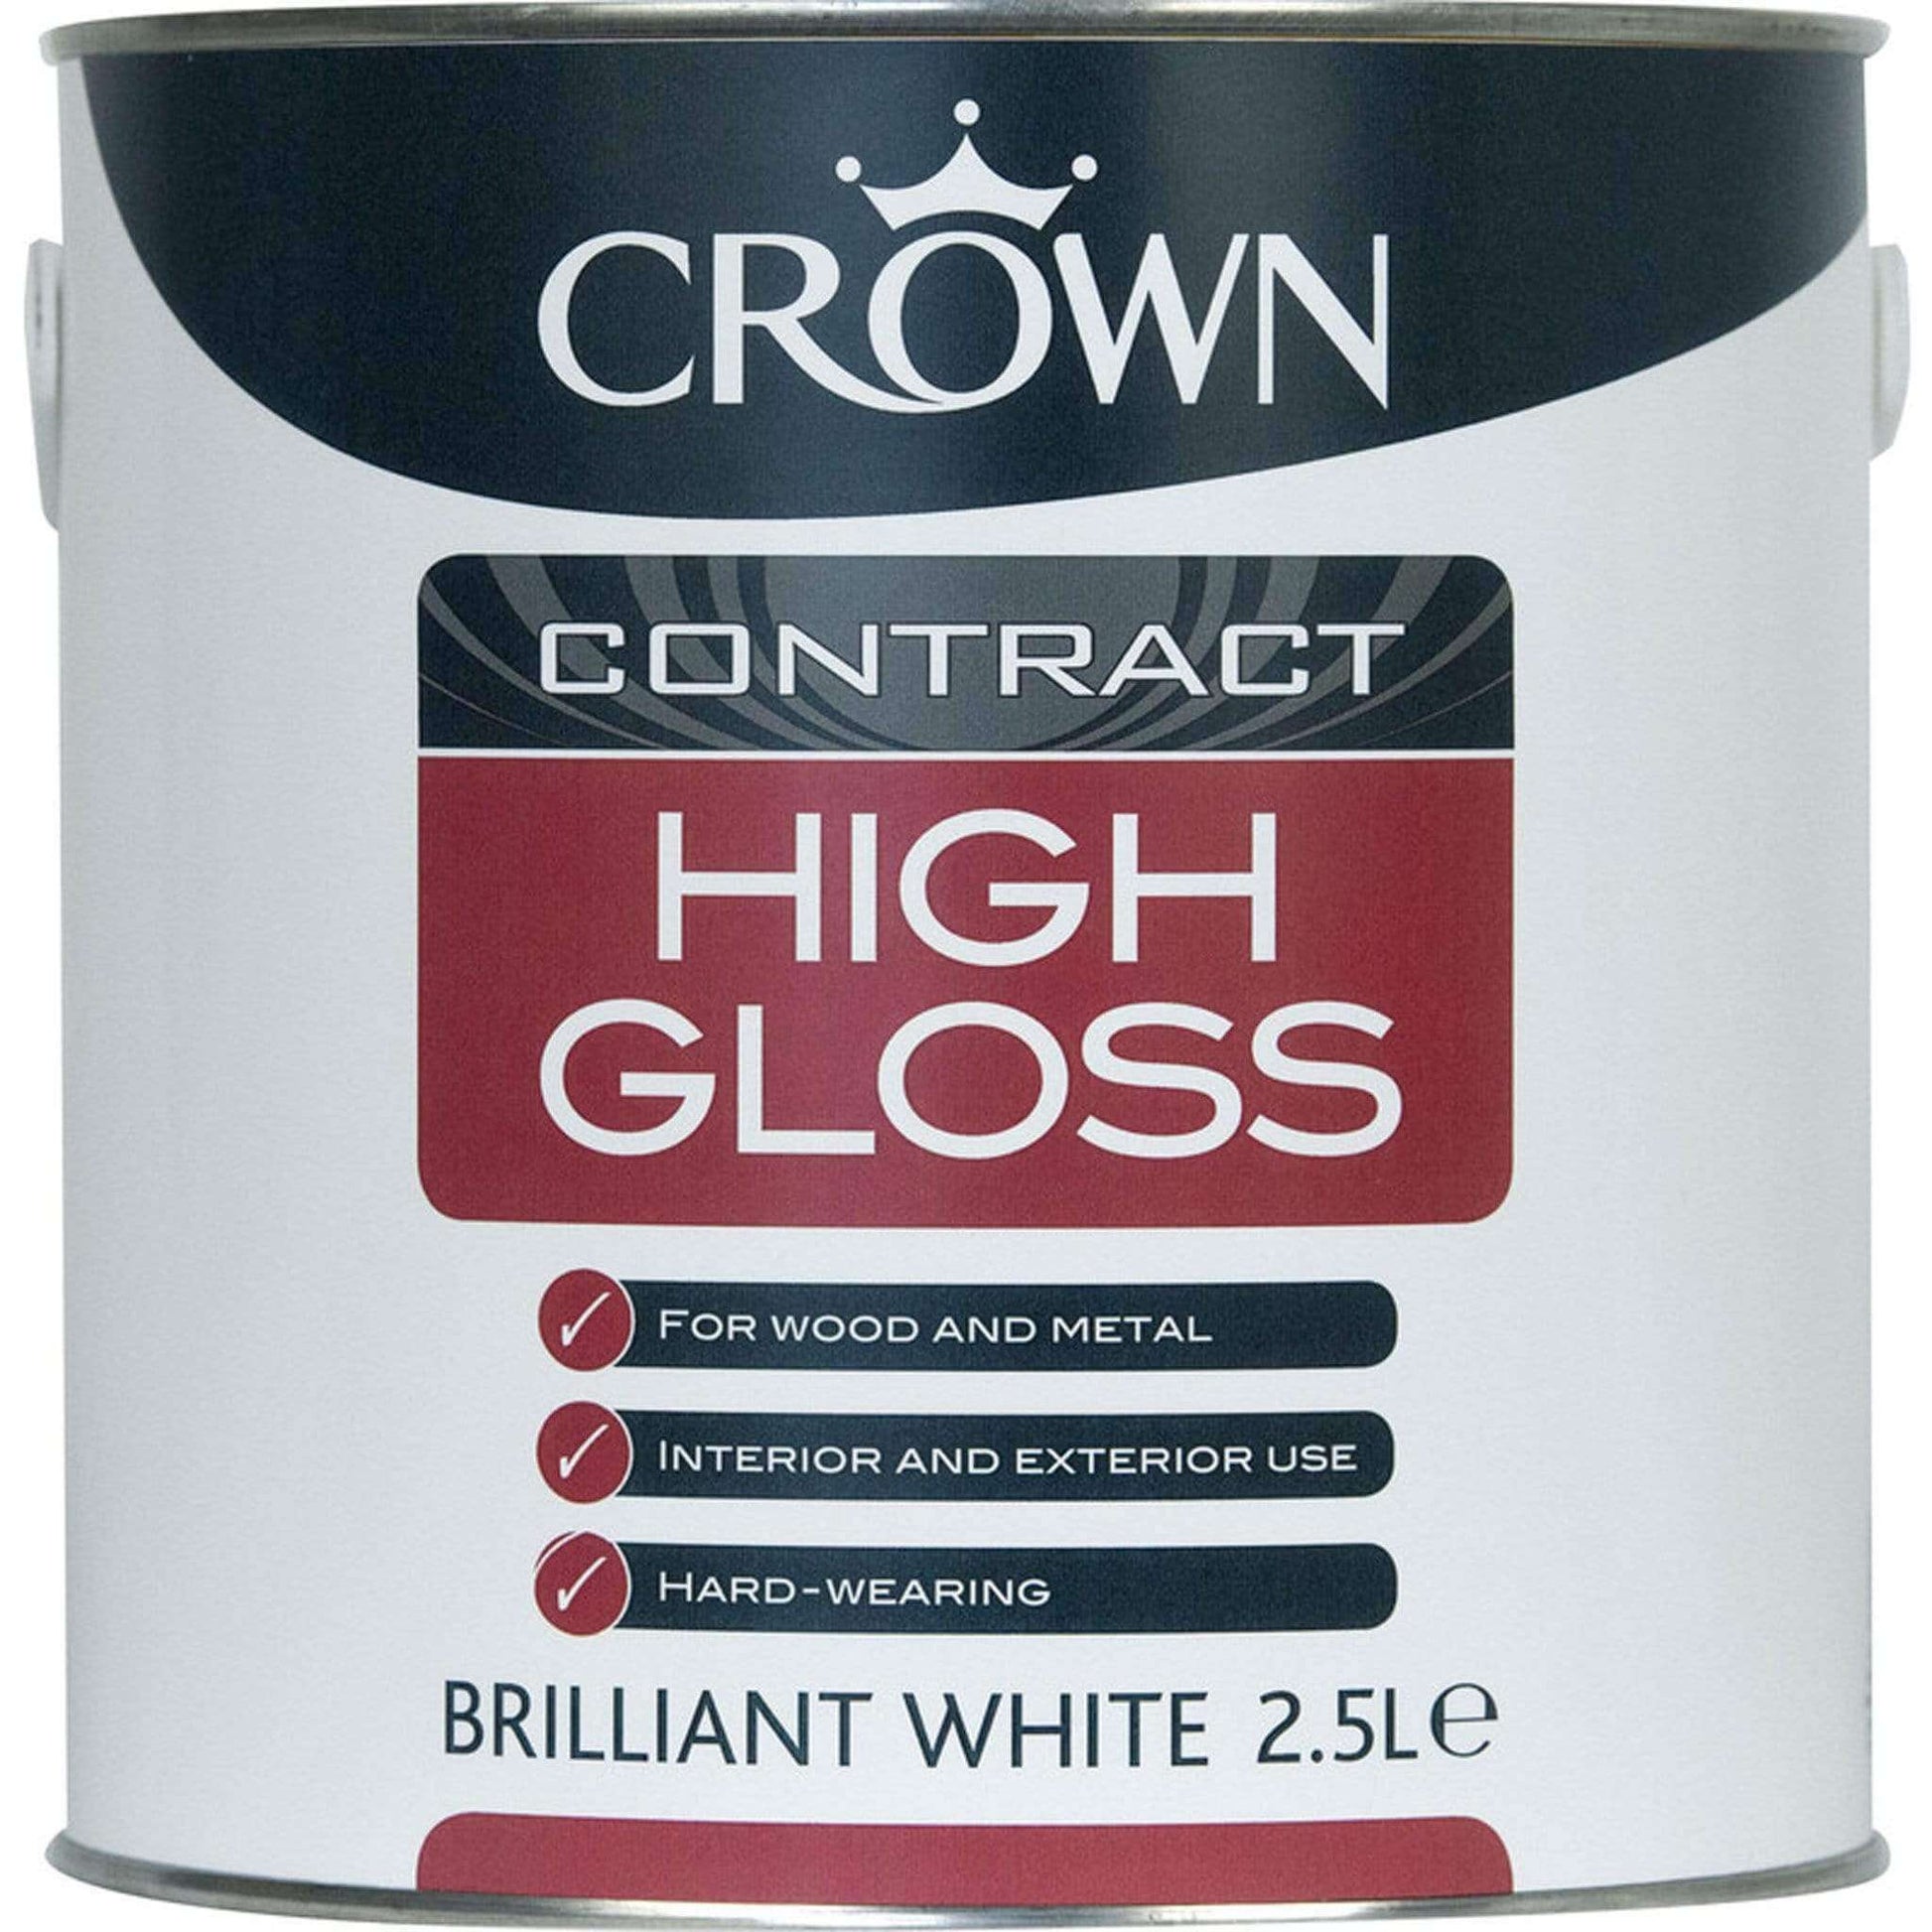 Paint  -  Crown Contract High Gloss Brilliant White 2.5L  -  50145635